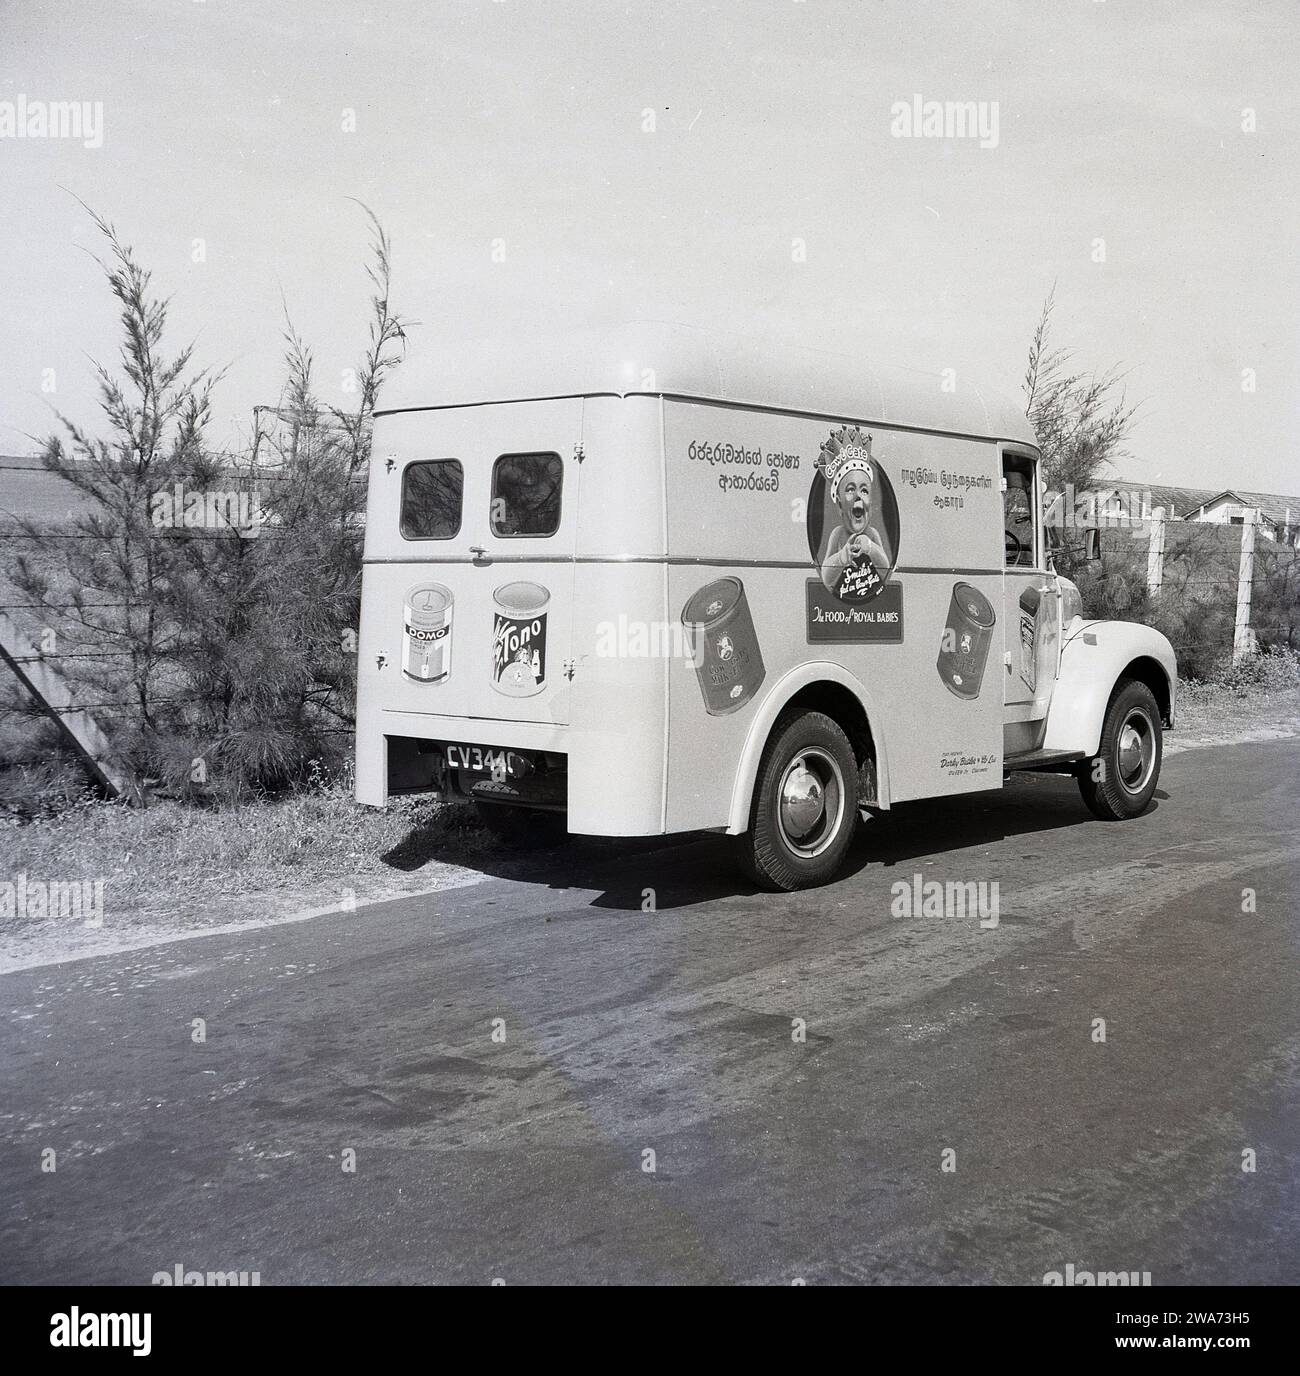 1953, historical, a Commer delivery van on a road in Colombo, Celyon, South Asia. On the side of the van, a smiling baby wearing a crown with the strapline, 'the Food of Royal Babies' and tins of Cow & Gate Milk-Food. Sole Agents: Darley Butler & Co Ltd, Queen St, Colombo. The Cow & Gate 'smiler', a happy, healthy looking baby, first appeared on product packaging & adverts in the 1930s. The 'Royal Baby; with a crown on its head dates back to 1937 and the Coronation of Briitsh King George VI, when the English diary company began to use 'royal association' to endorse their baby milk formula. Stock Photo